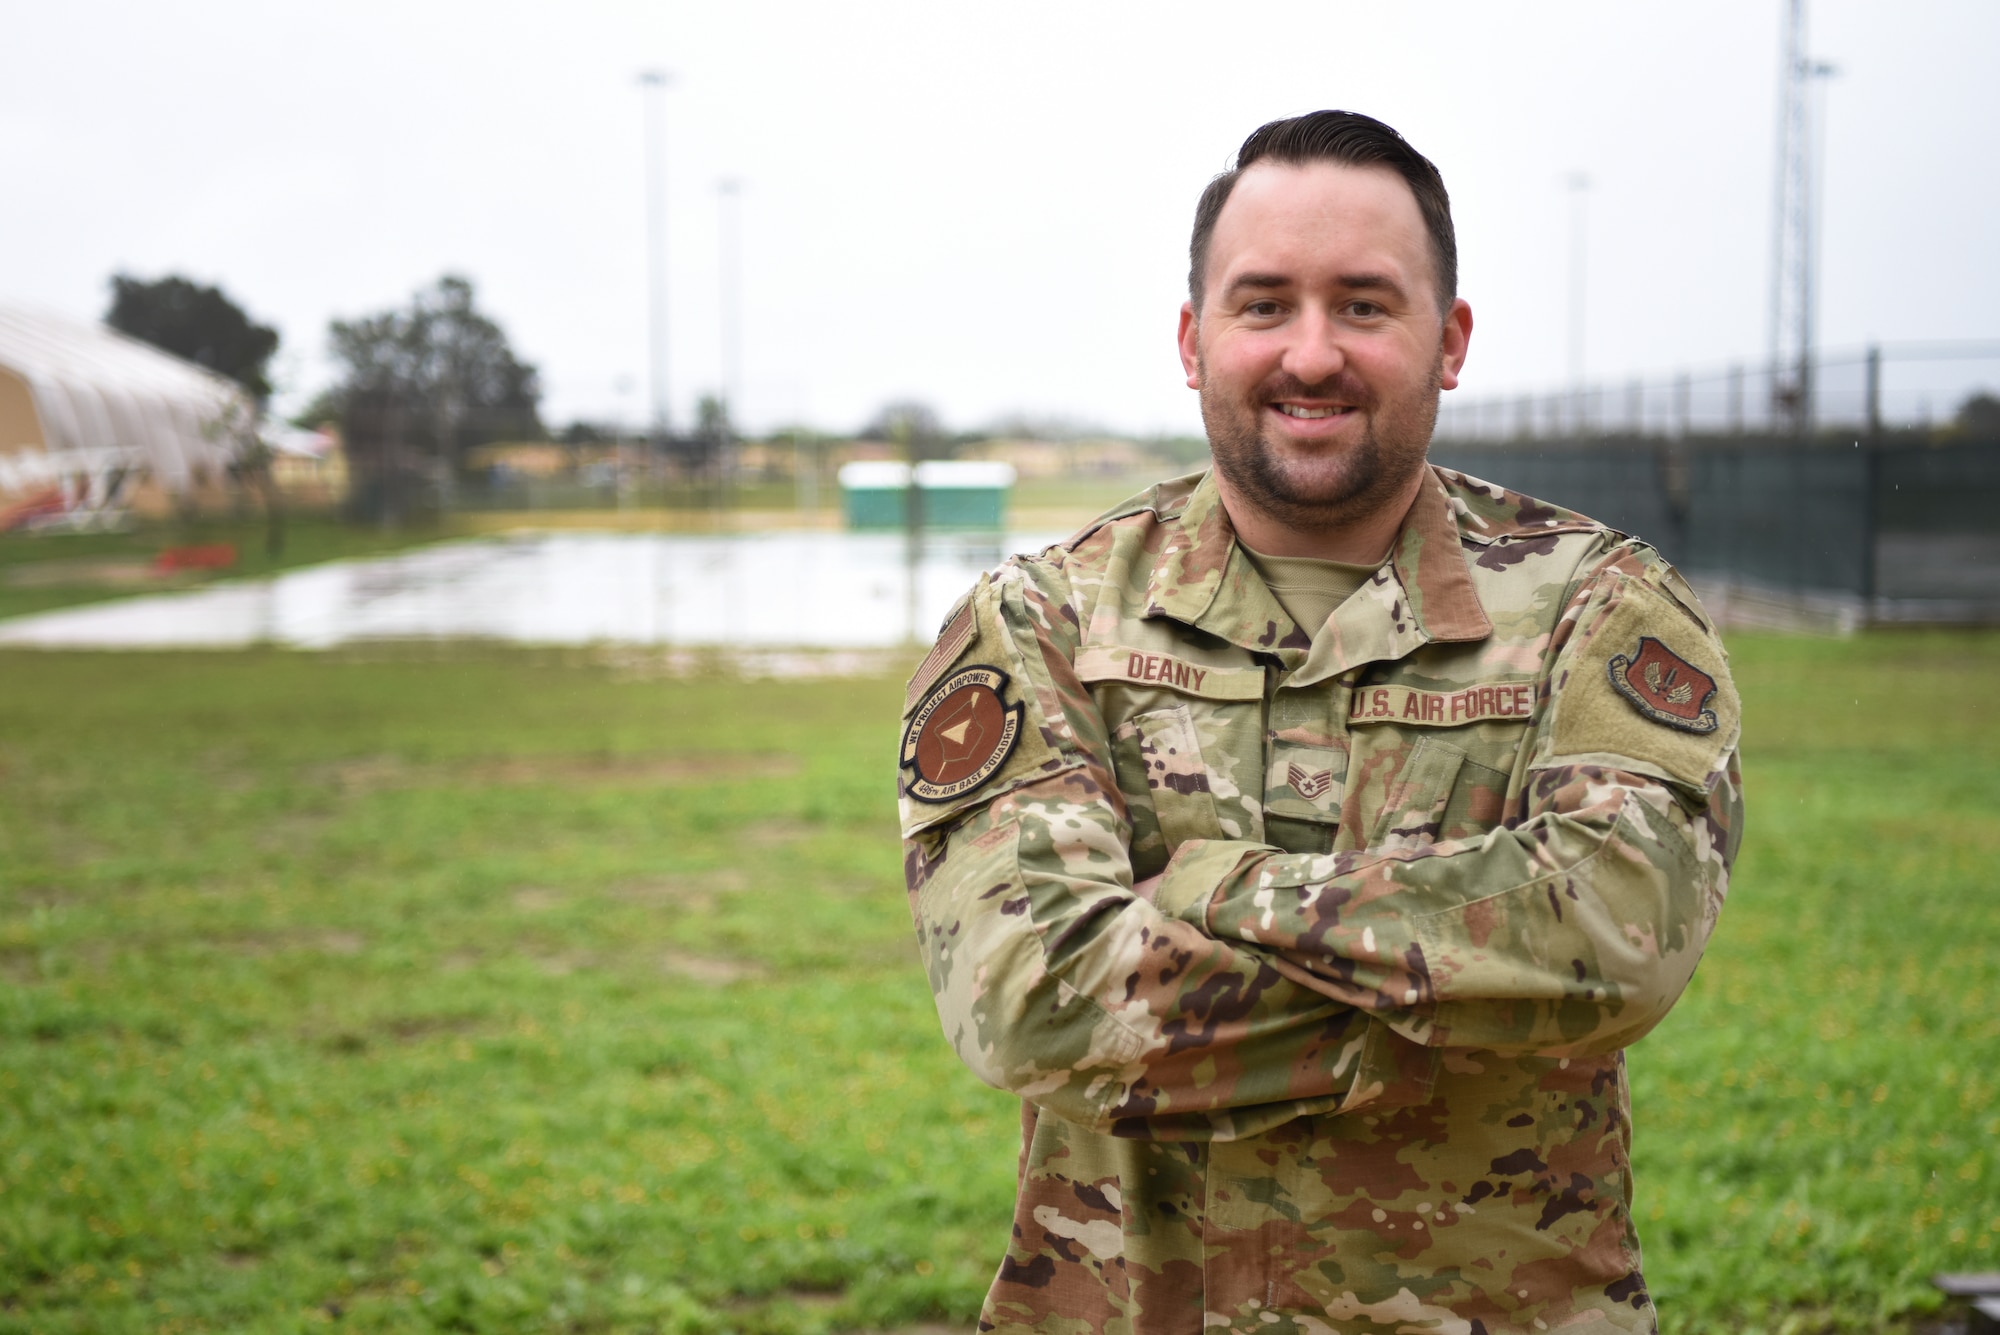 Staff Sgt. Taylor Deany, 496th Air Base Squadron Force Support Flight non-commissioned officer in charge of community services, tackled a challenging job that was brand new to him when he arrived at Morón Air Base, Spain, in the Fall of 2021.